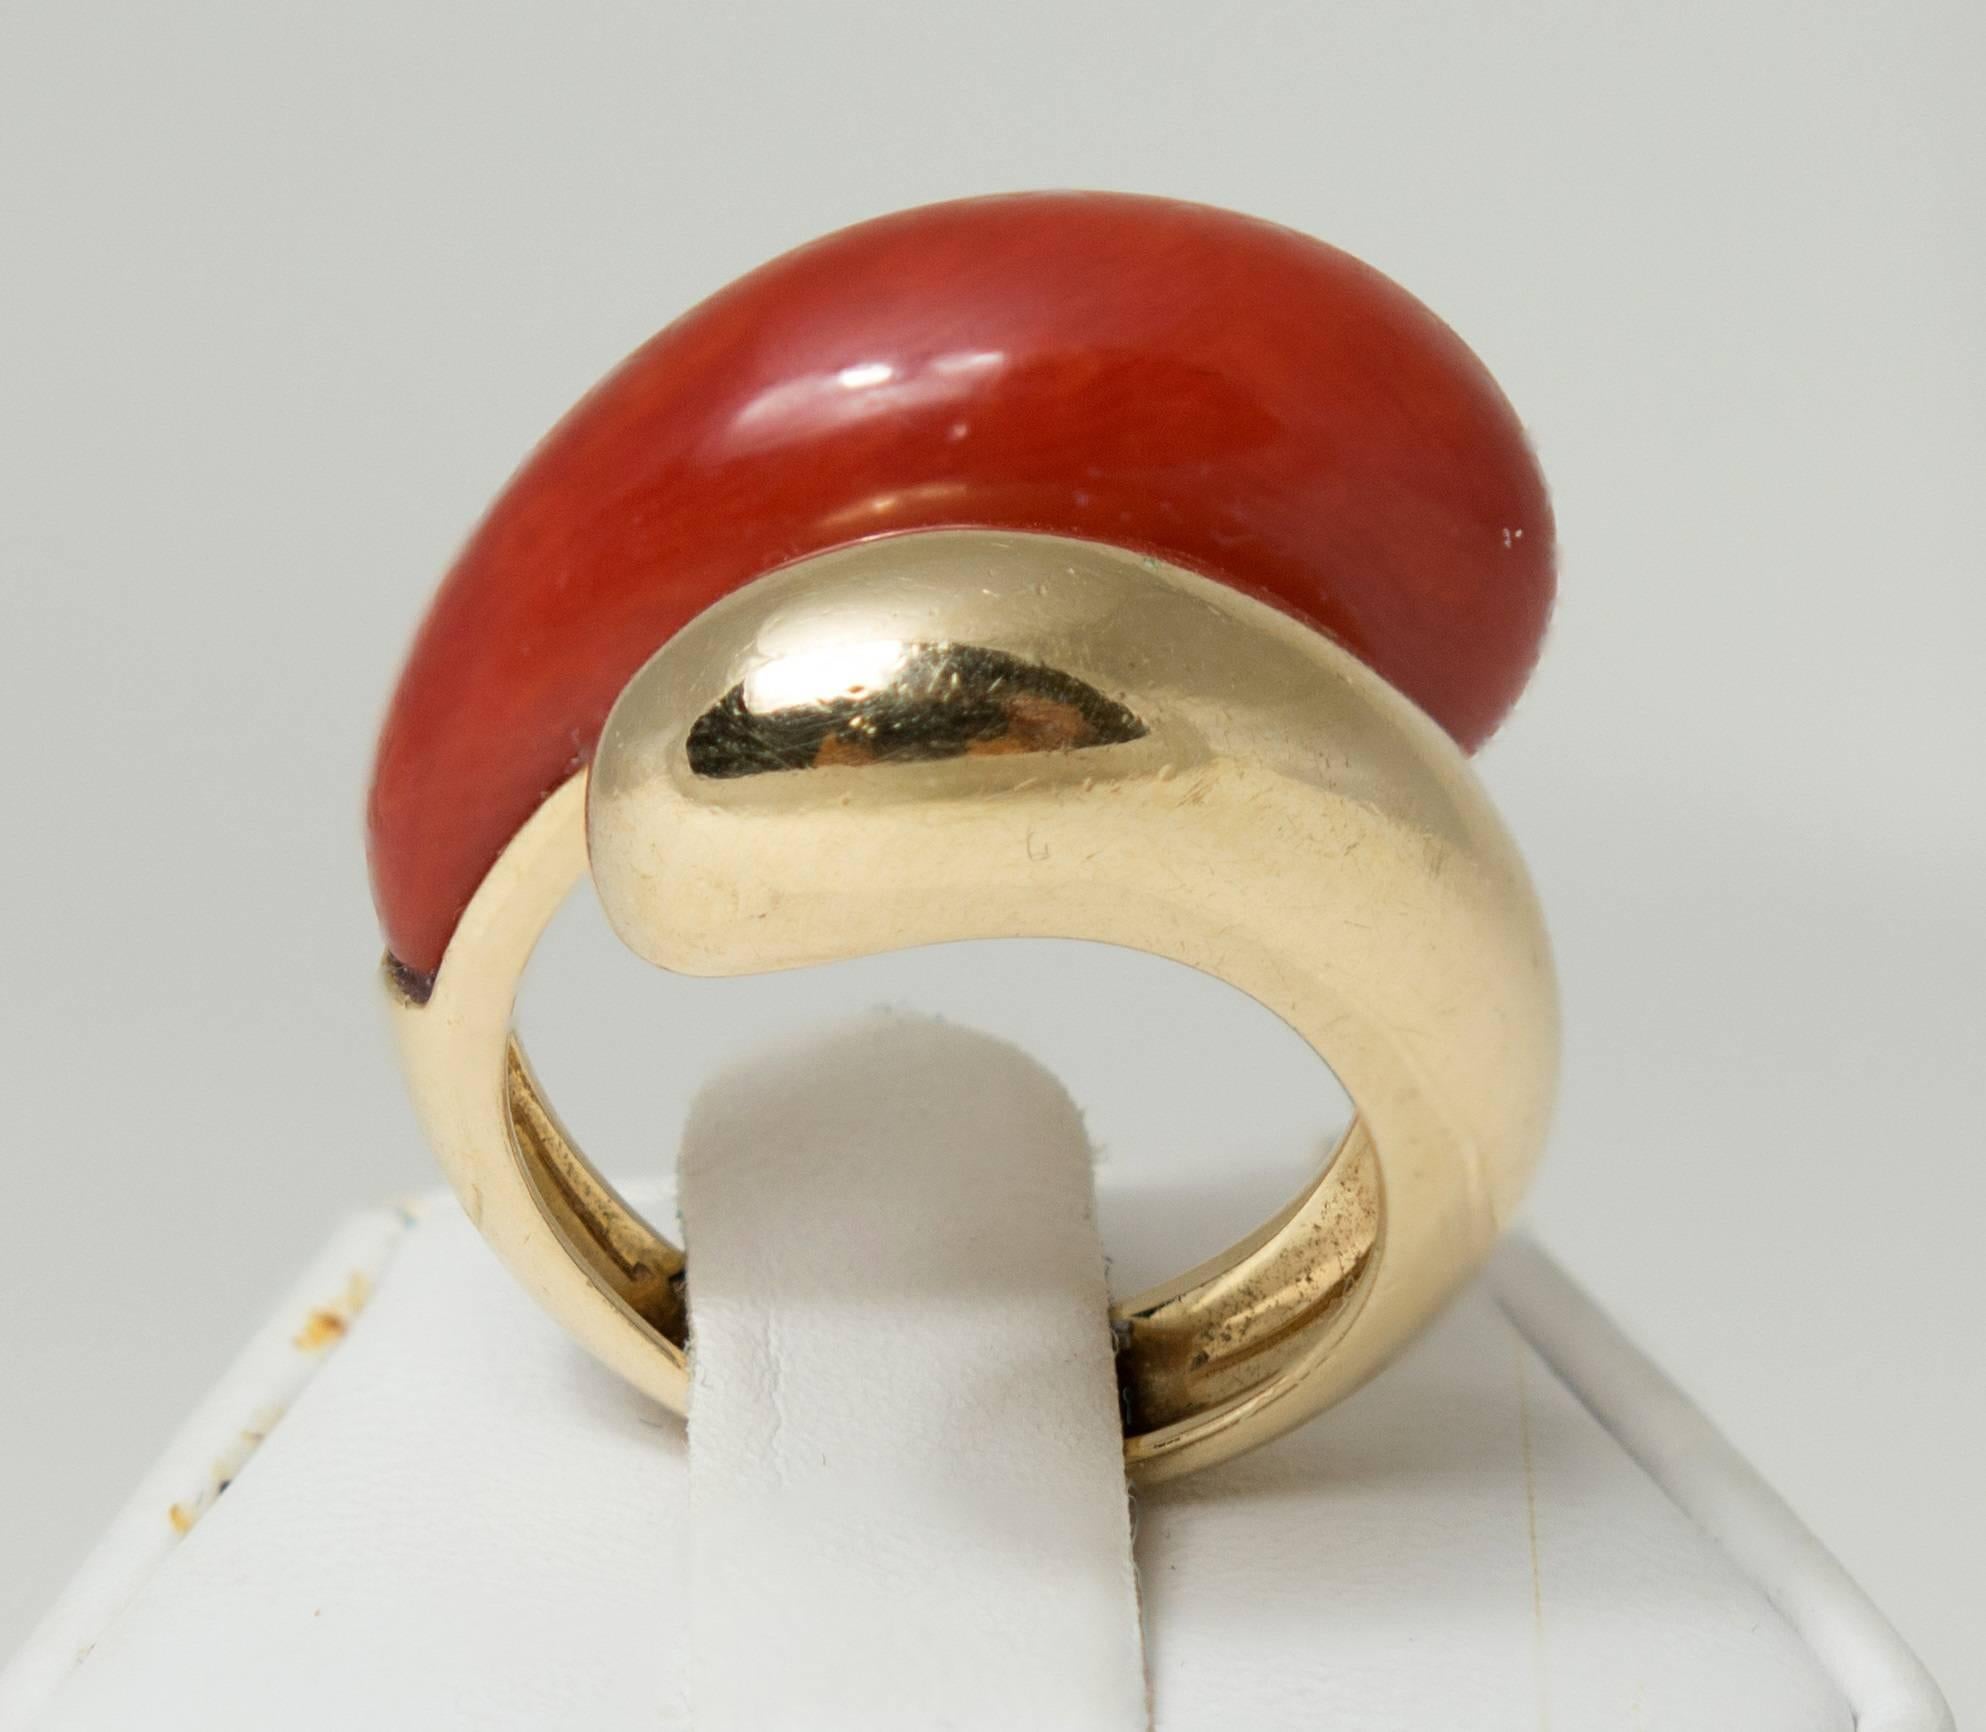 Beautiful classic elegant cross over 14K gold ring with red orangy color coral.
Total weight 7.7 grams.
Ring size 6.5